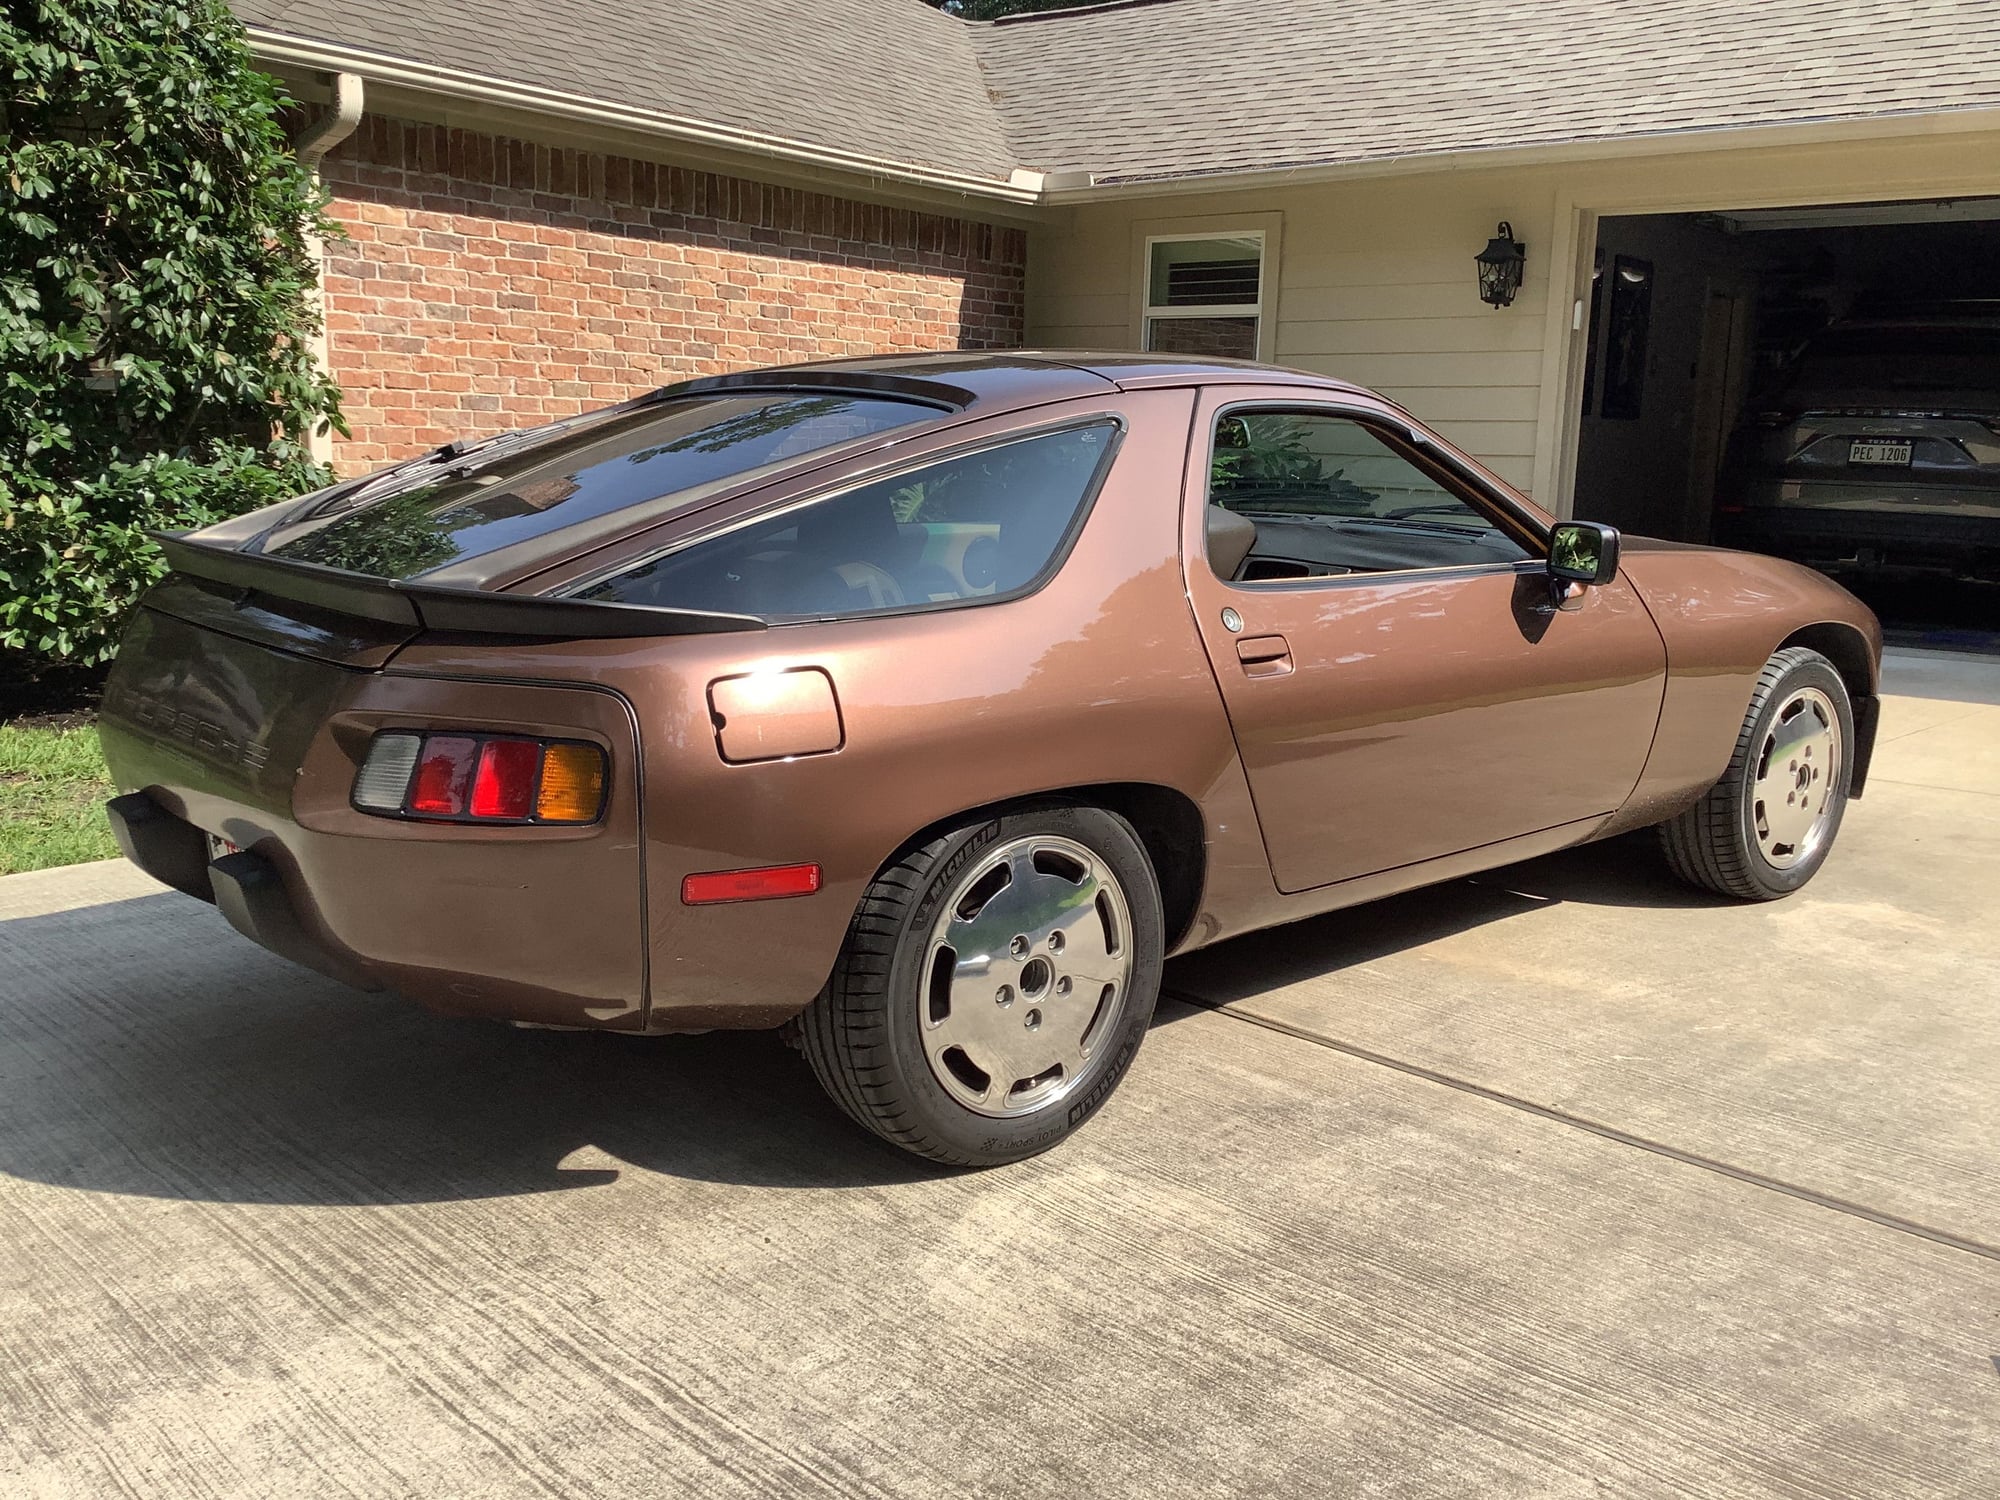 1985 Porsche 928 - 1985 928 automatic - Used - VIN WP0JB0928FS862013 - 140,000 Miles - 8 cyl - 2WD - Automatic - Coupe - Brown - Houston, TX 77381, United States